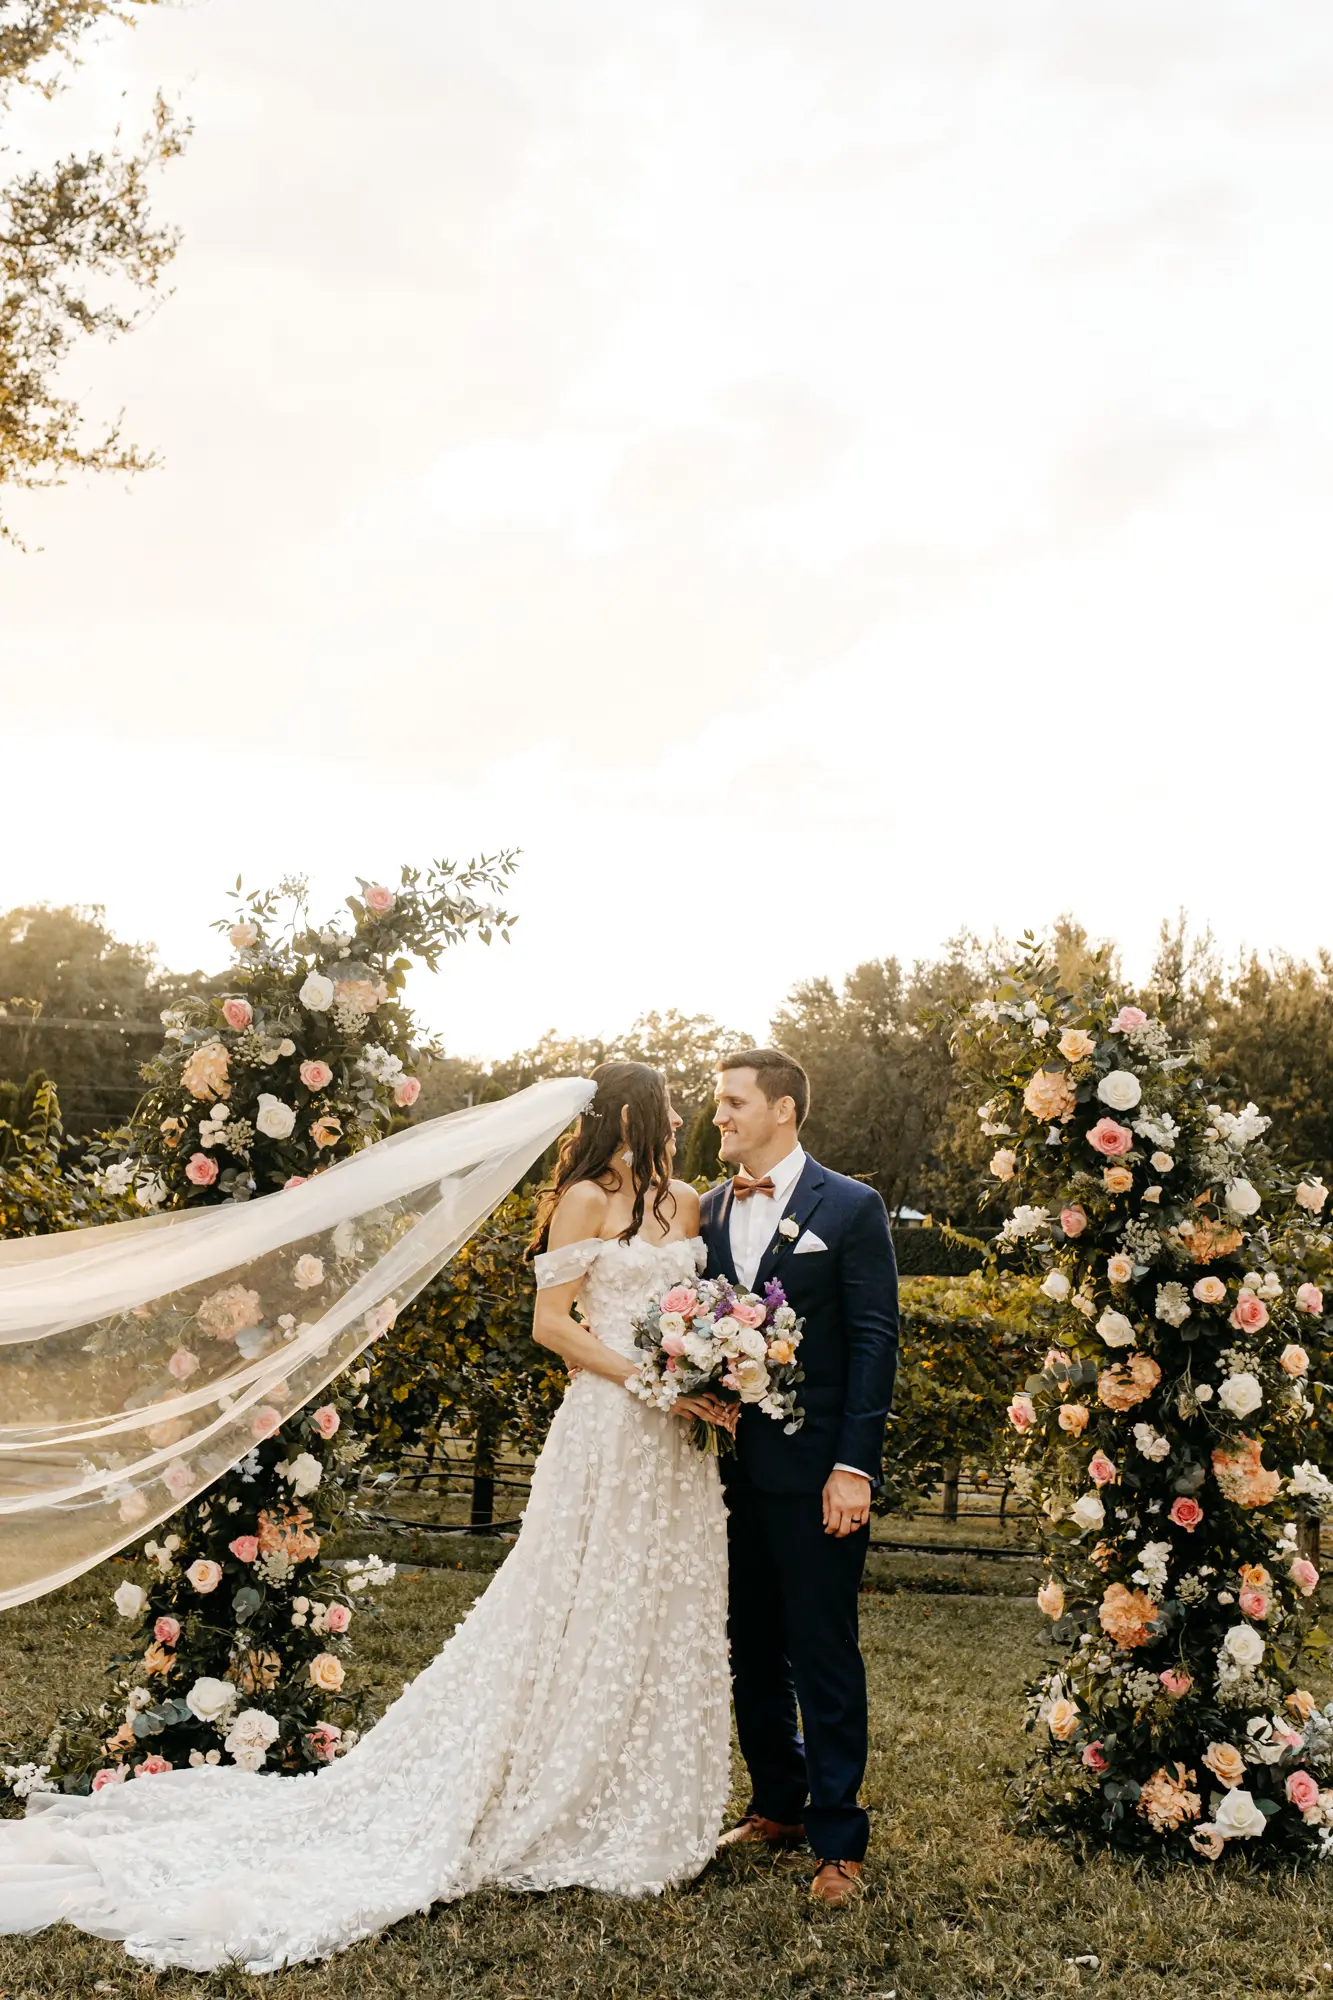 Bride and Groom Just Married Outdoor Vineyard Wedding Ceremony Inspiration | White and Pink Roses, Hydrangeas, and Greenery Decor Ideas | Tampa Bay Event Planner Coastal Coordinating | Florist Monarch Events